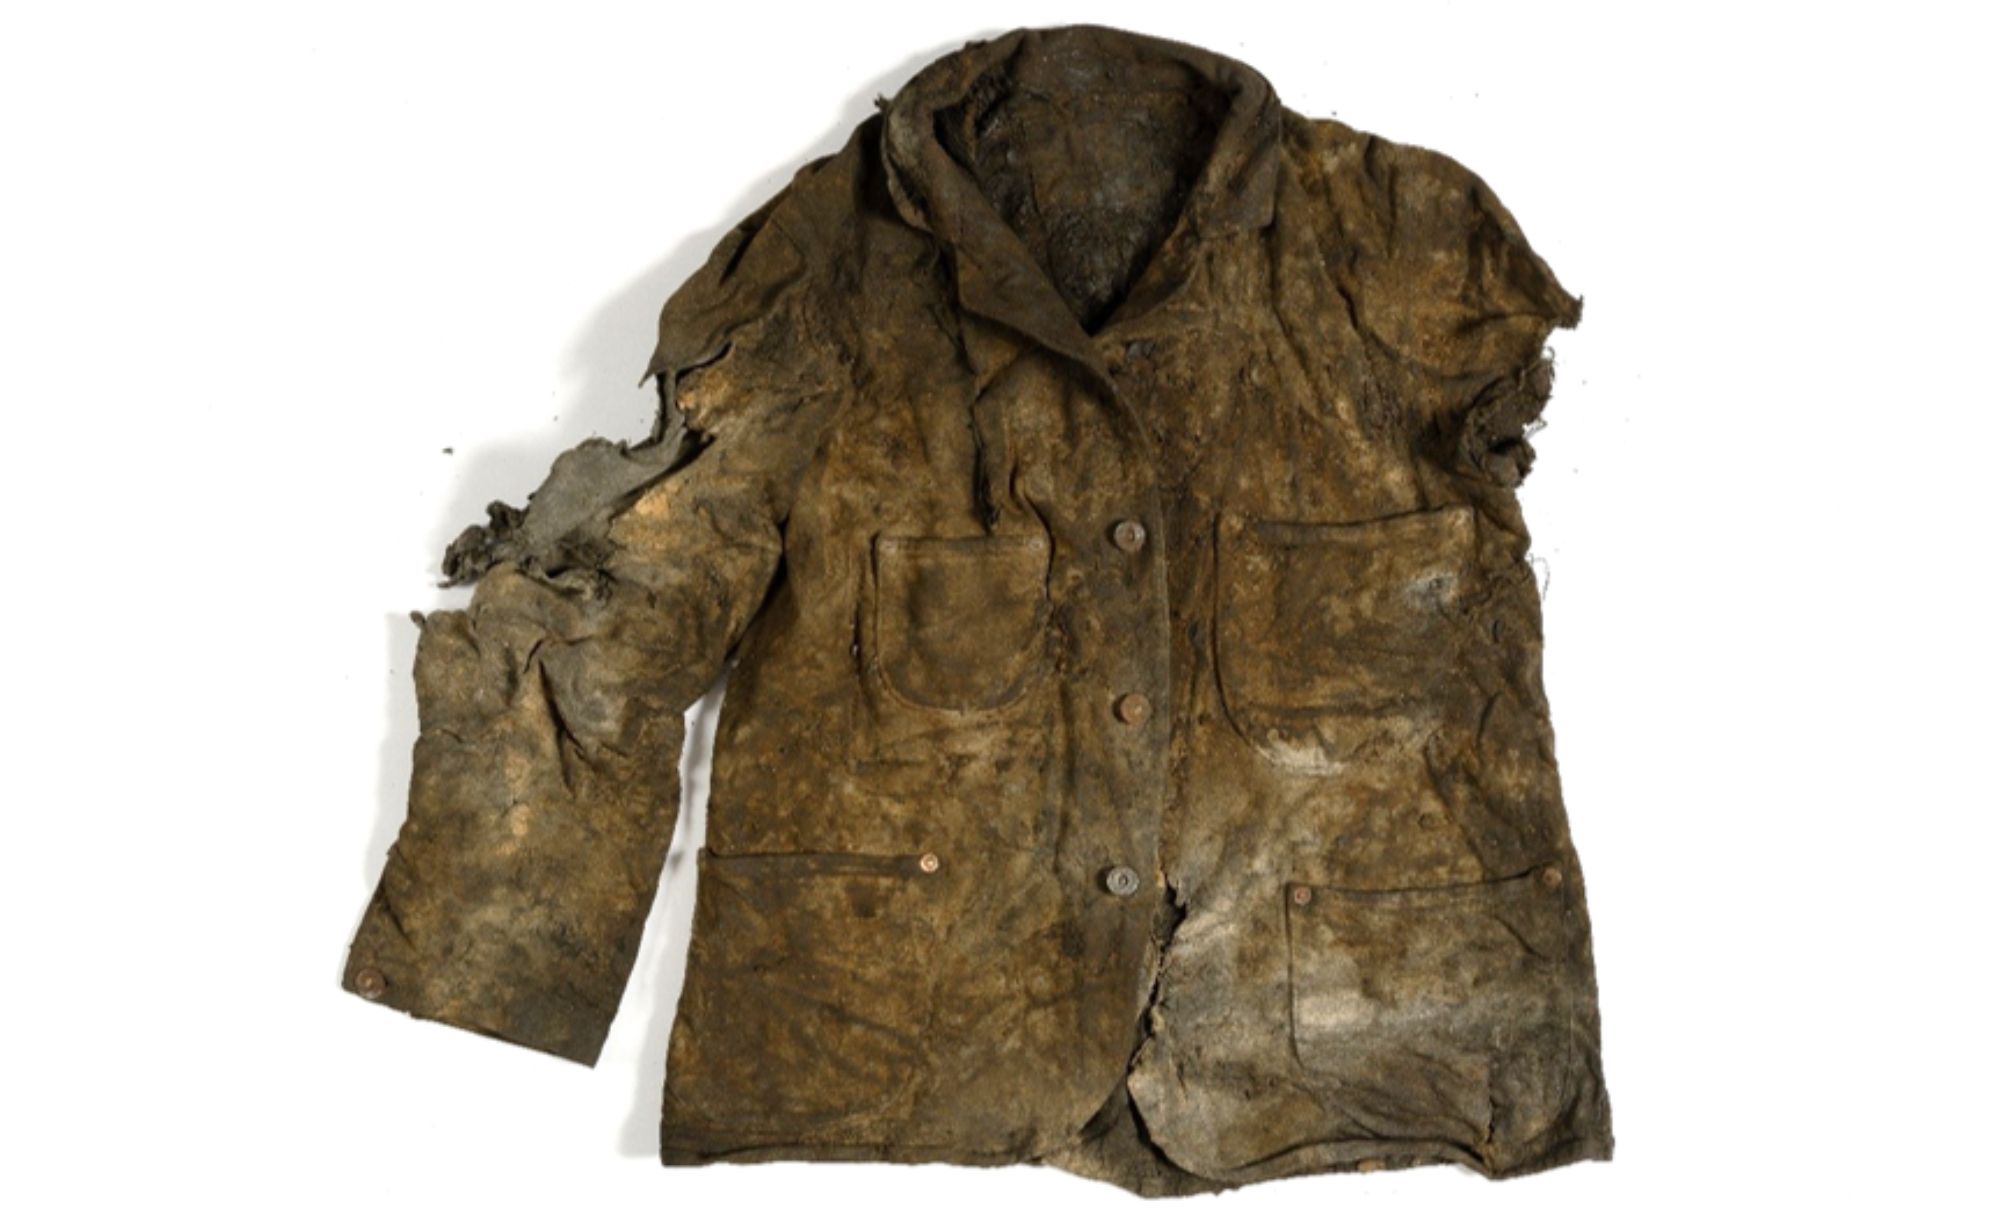 Sack Coat Now Second-Oldest Jacket in LS&Co. Archives - Levi